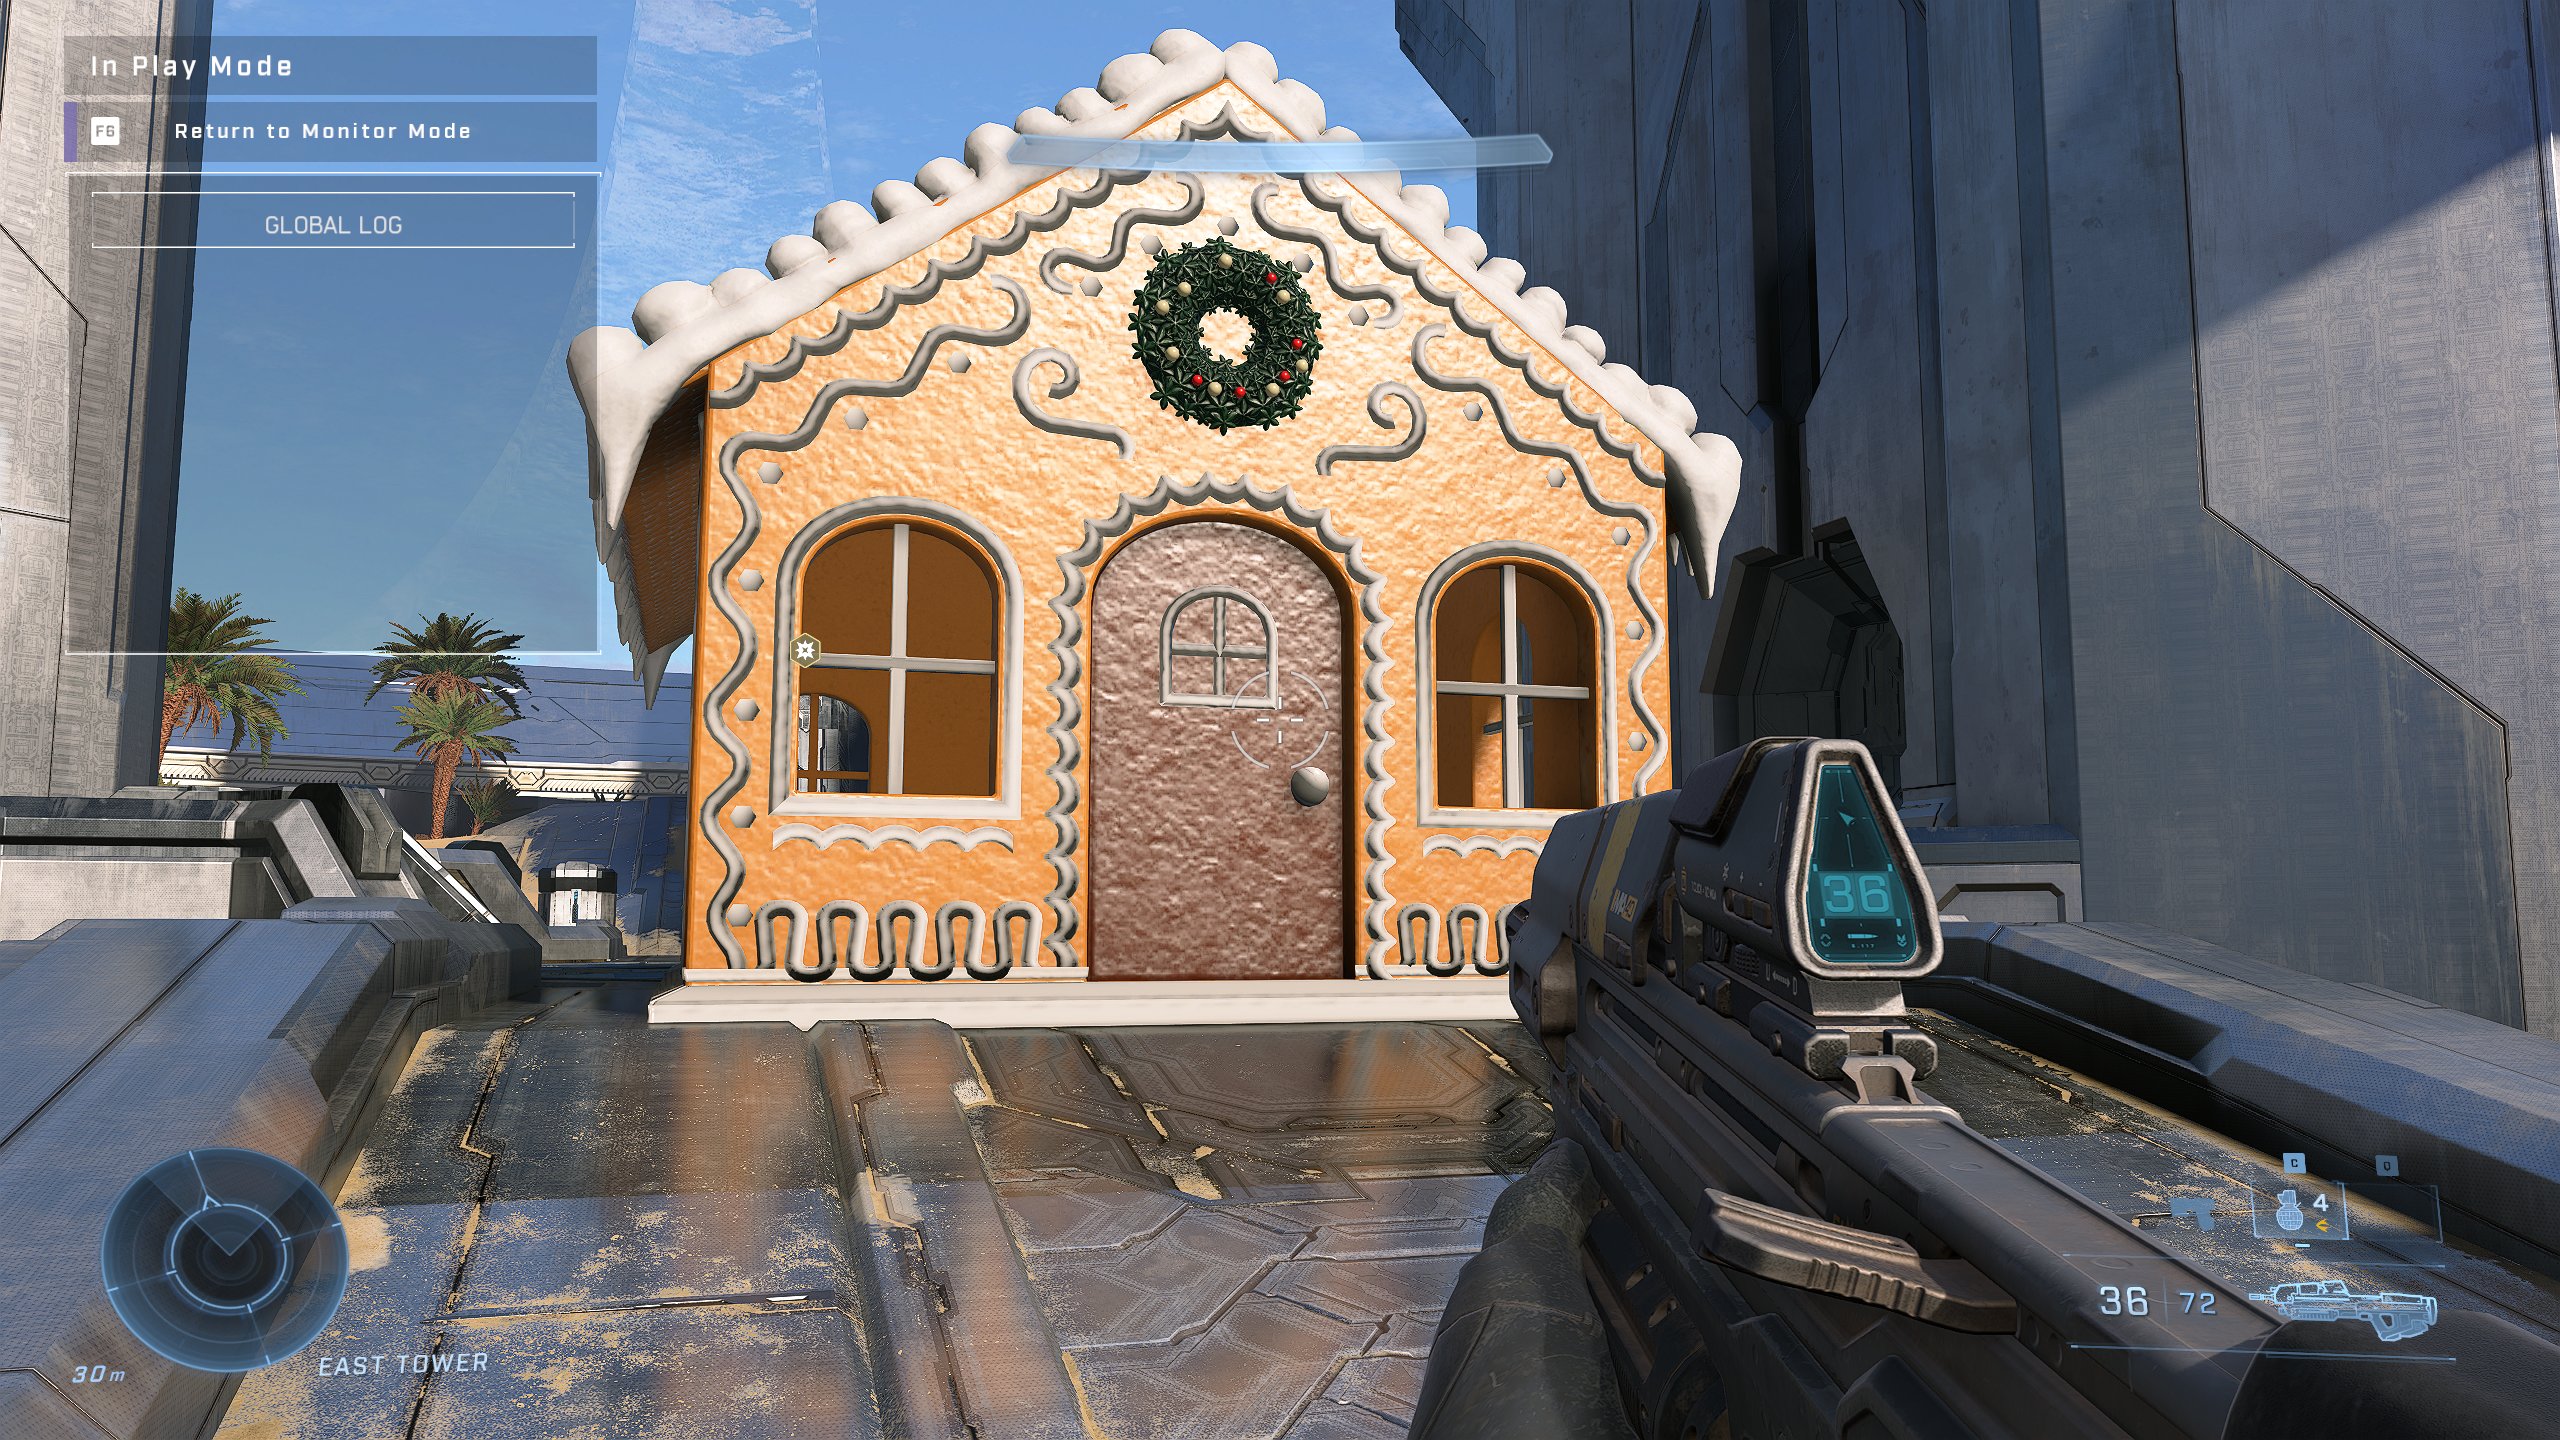 A gingerbread house made in Halo Infinite's Forge mode.